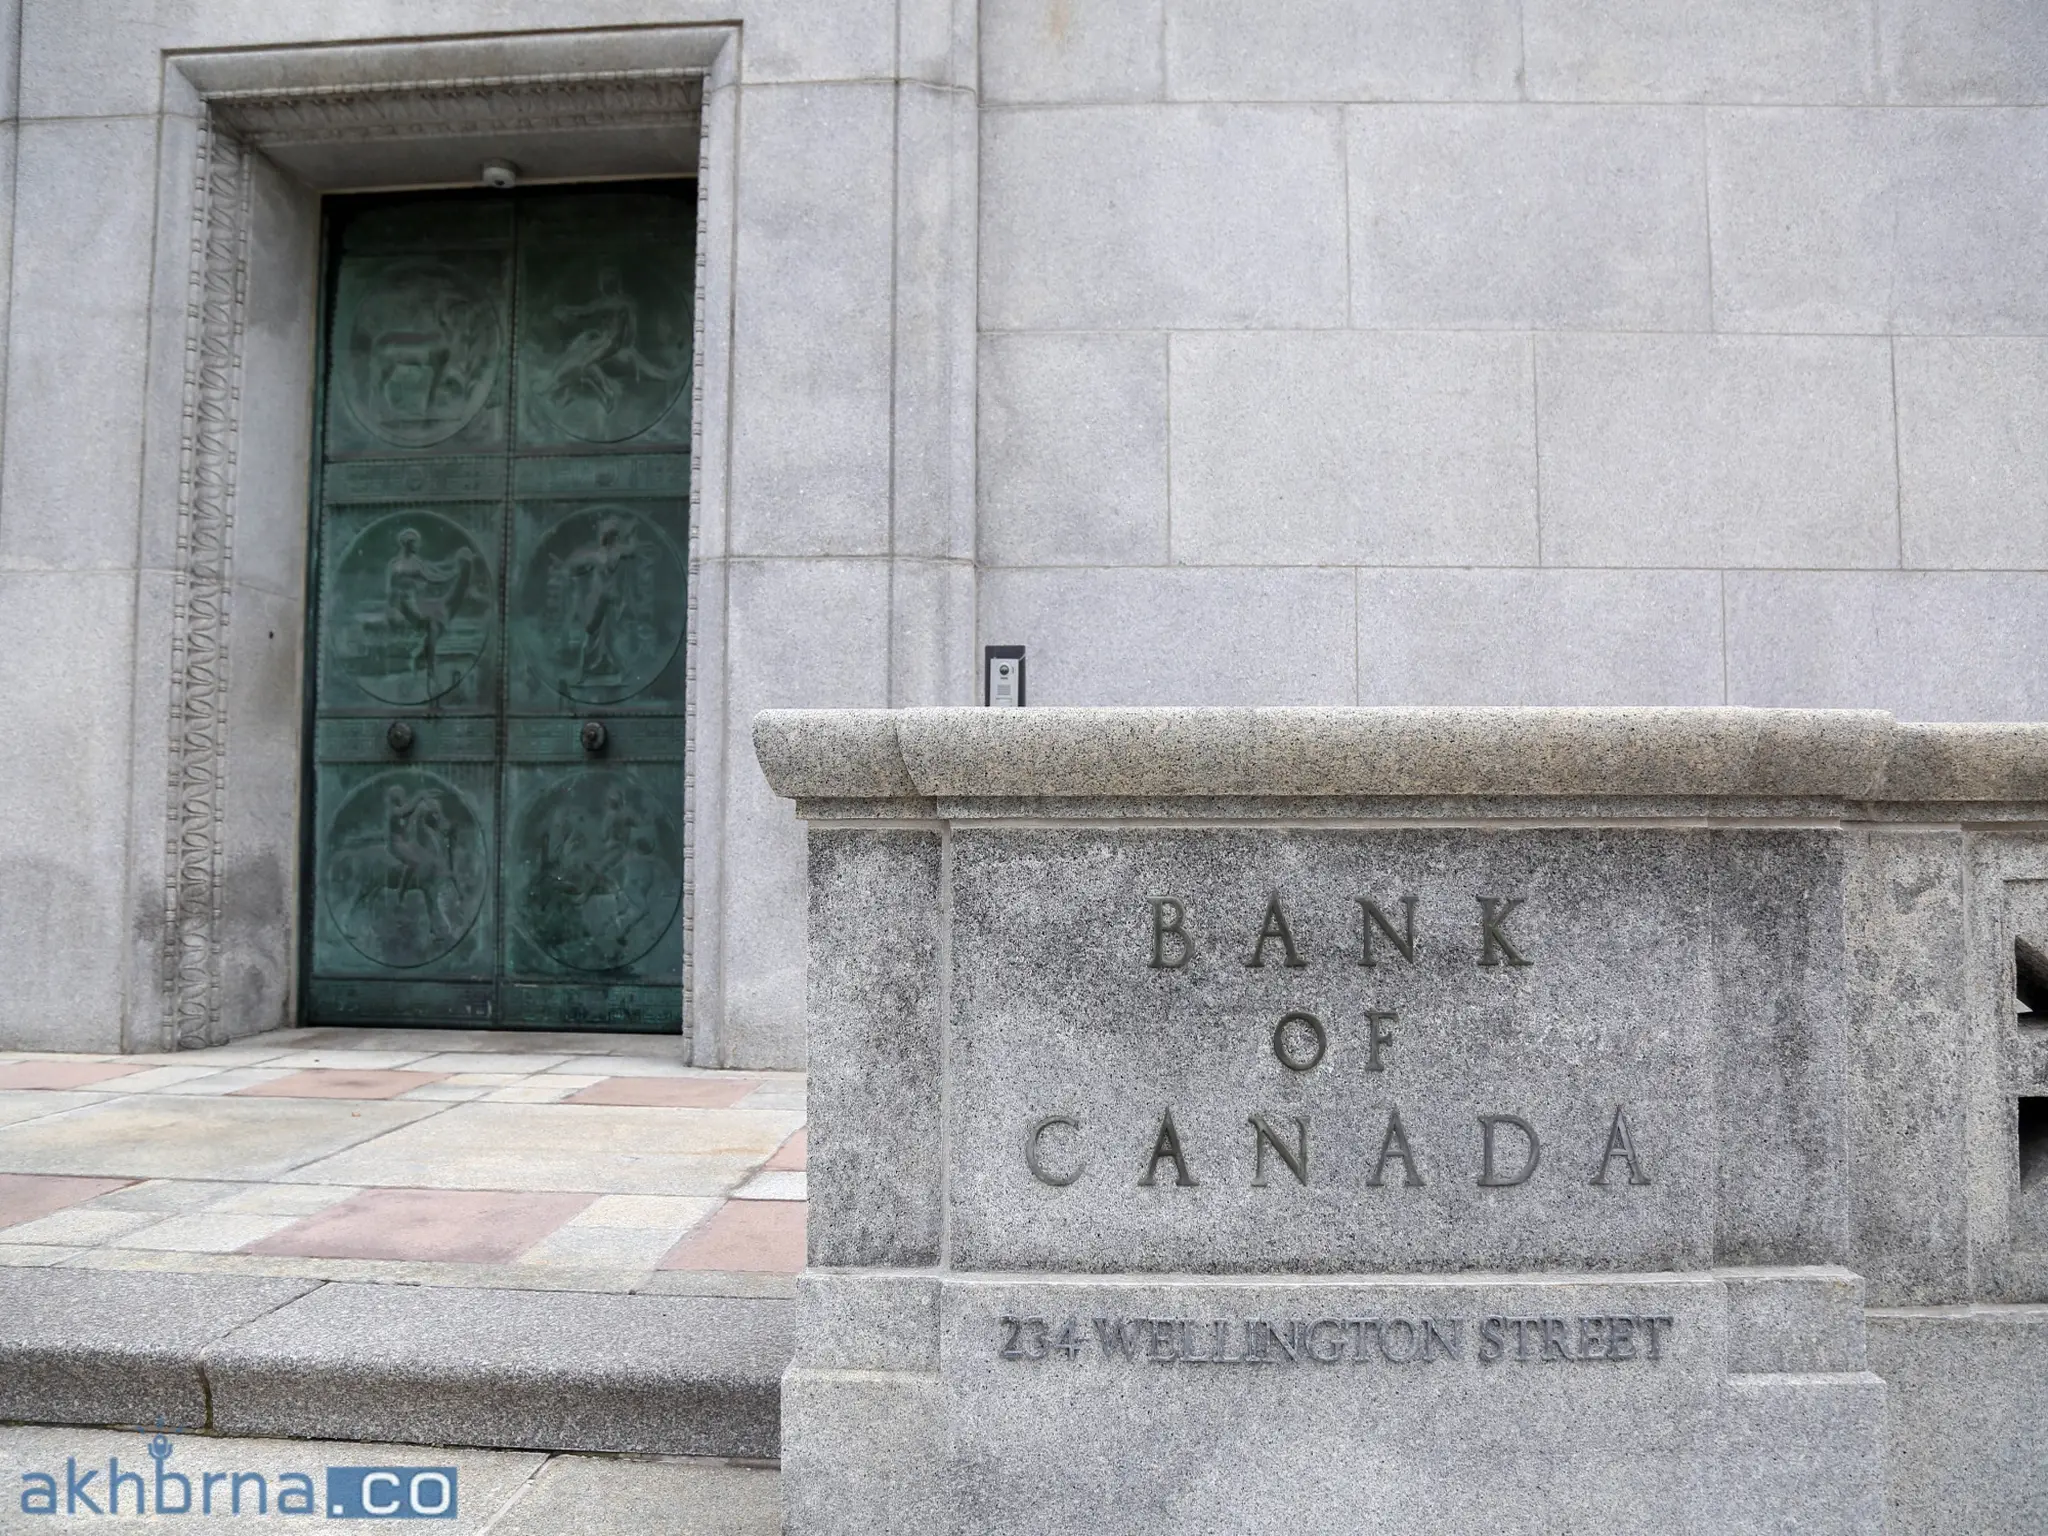 Bank of Canada announces maintaining key interest rate unchanged at 5%